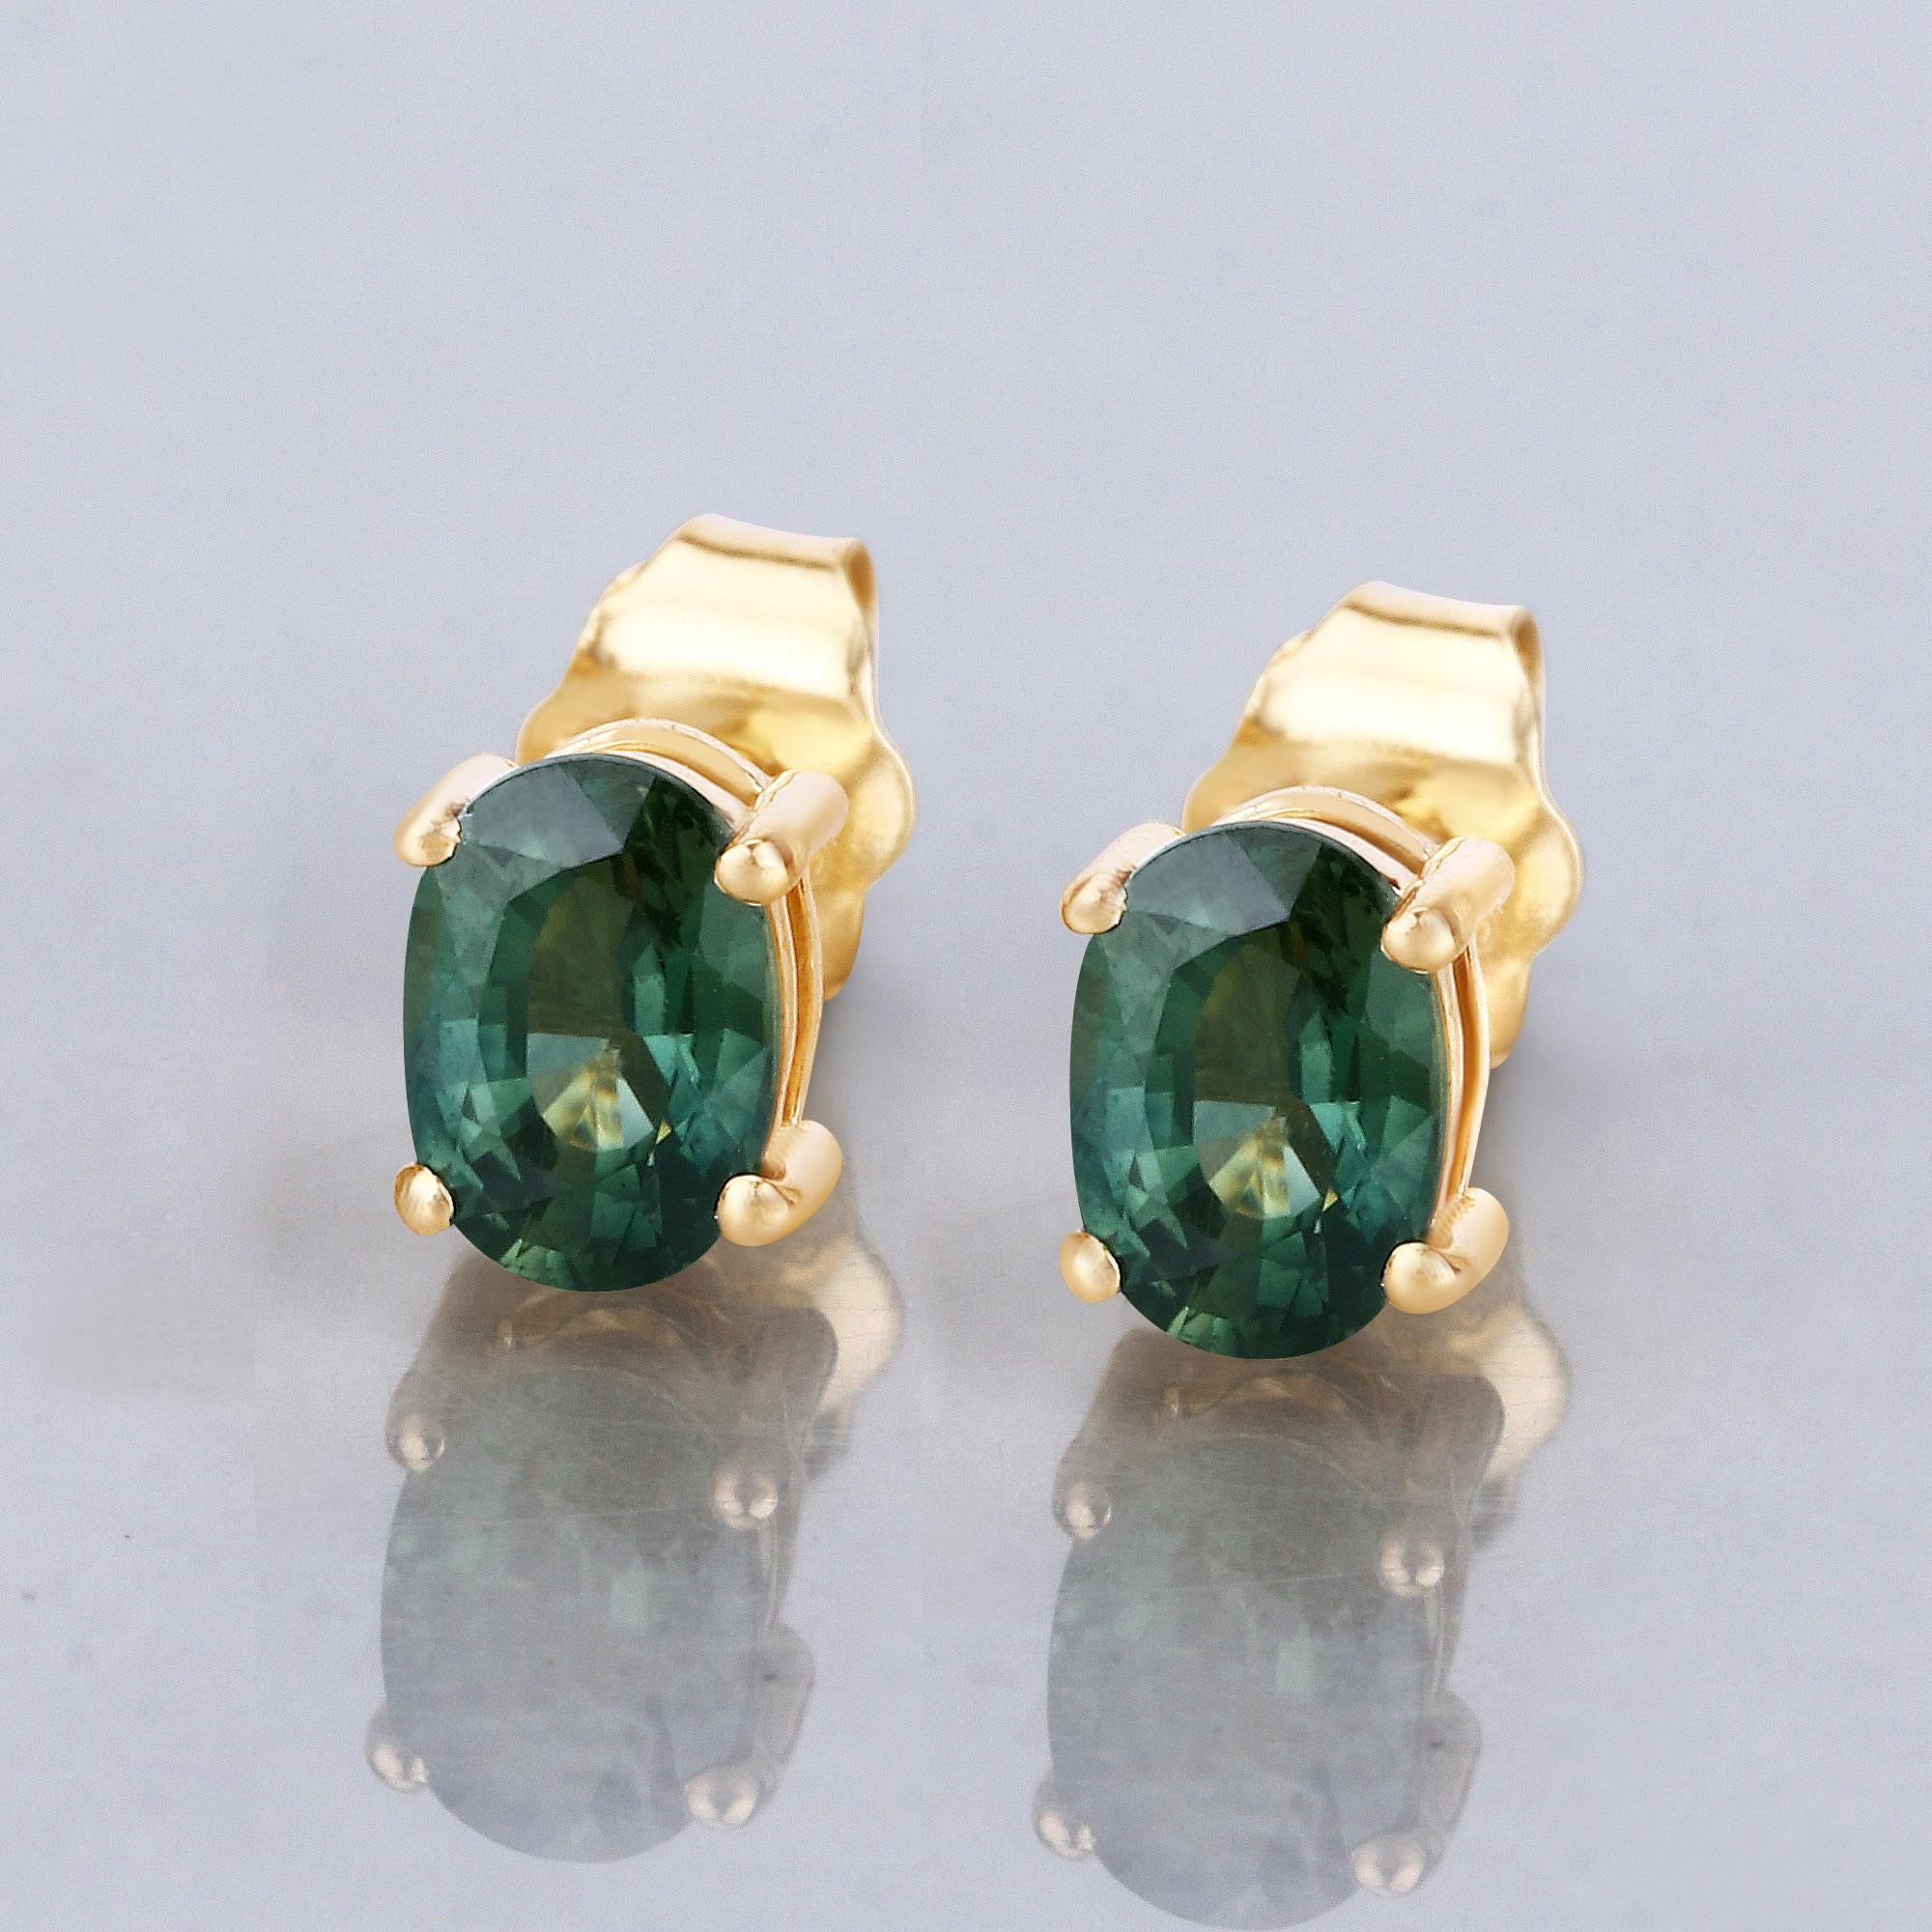 Oval Cut Green Sapphire Stud Earrings 1.16 Carats Total 14K Yellow Gold For Sale